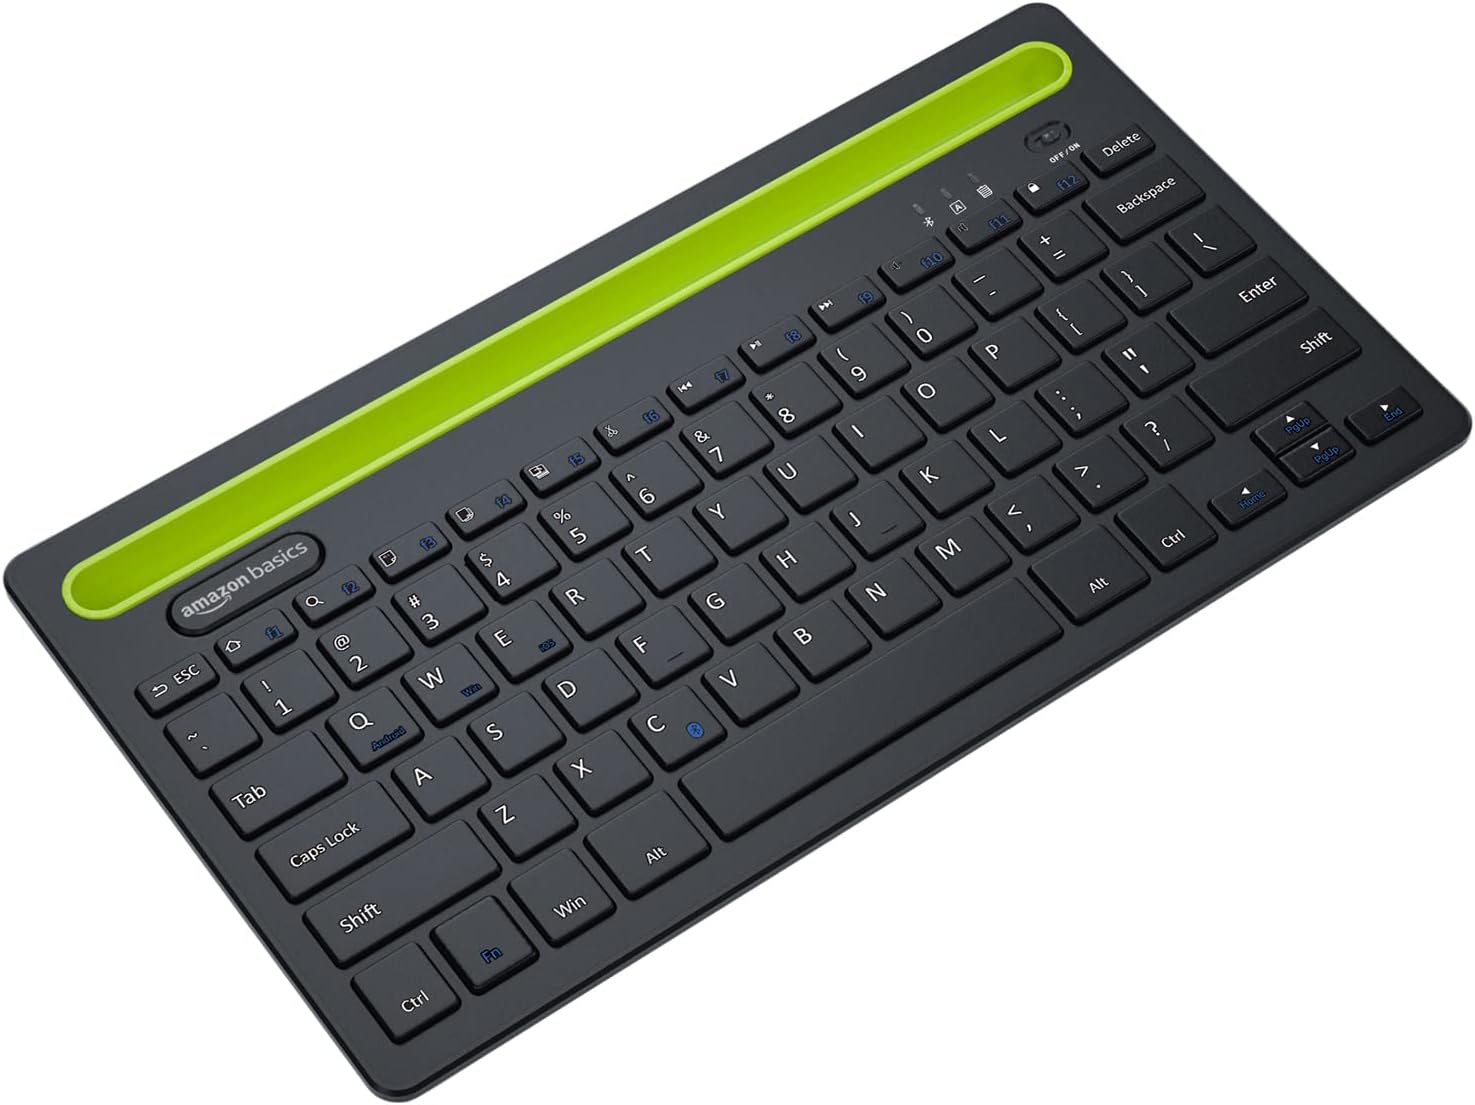 Amazon Basics Wireless Bluetooth Multi-Device Keyboard for Windows, Apple iOS Android Or Chrome, Compact Space-Saving Design, for Pc/Mac/Laptop/Smartphone/Tablet (Black)